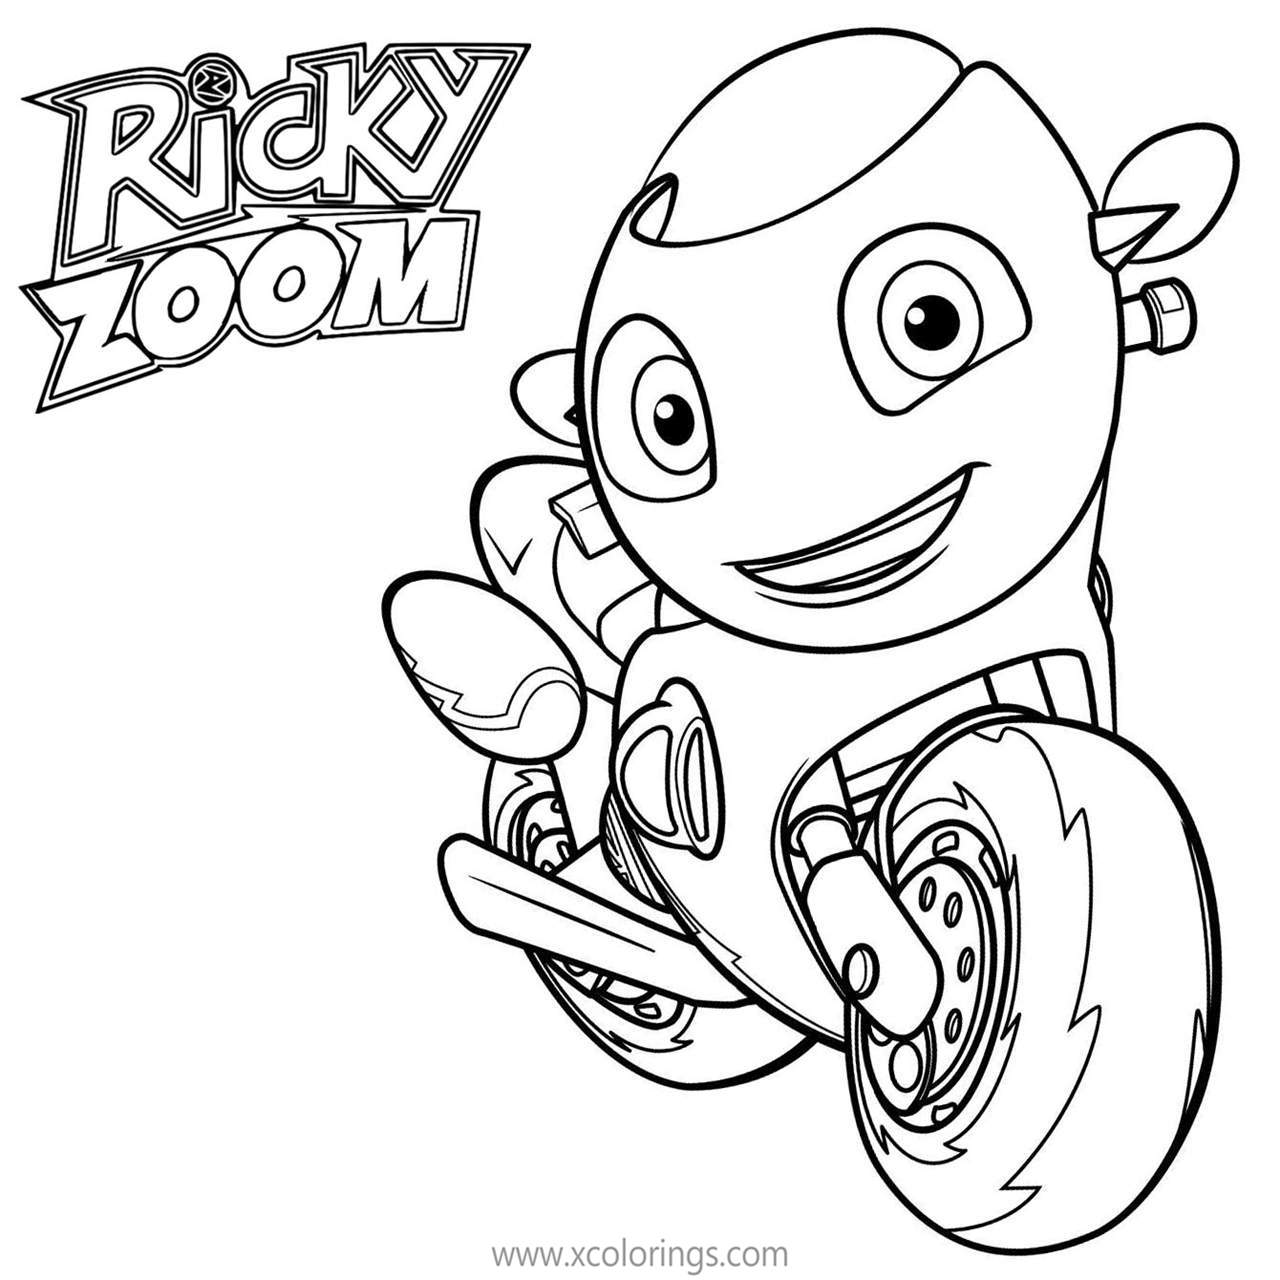 Ricky Zoom Character Dirt Bike Coloring Pages - XColorings.com